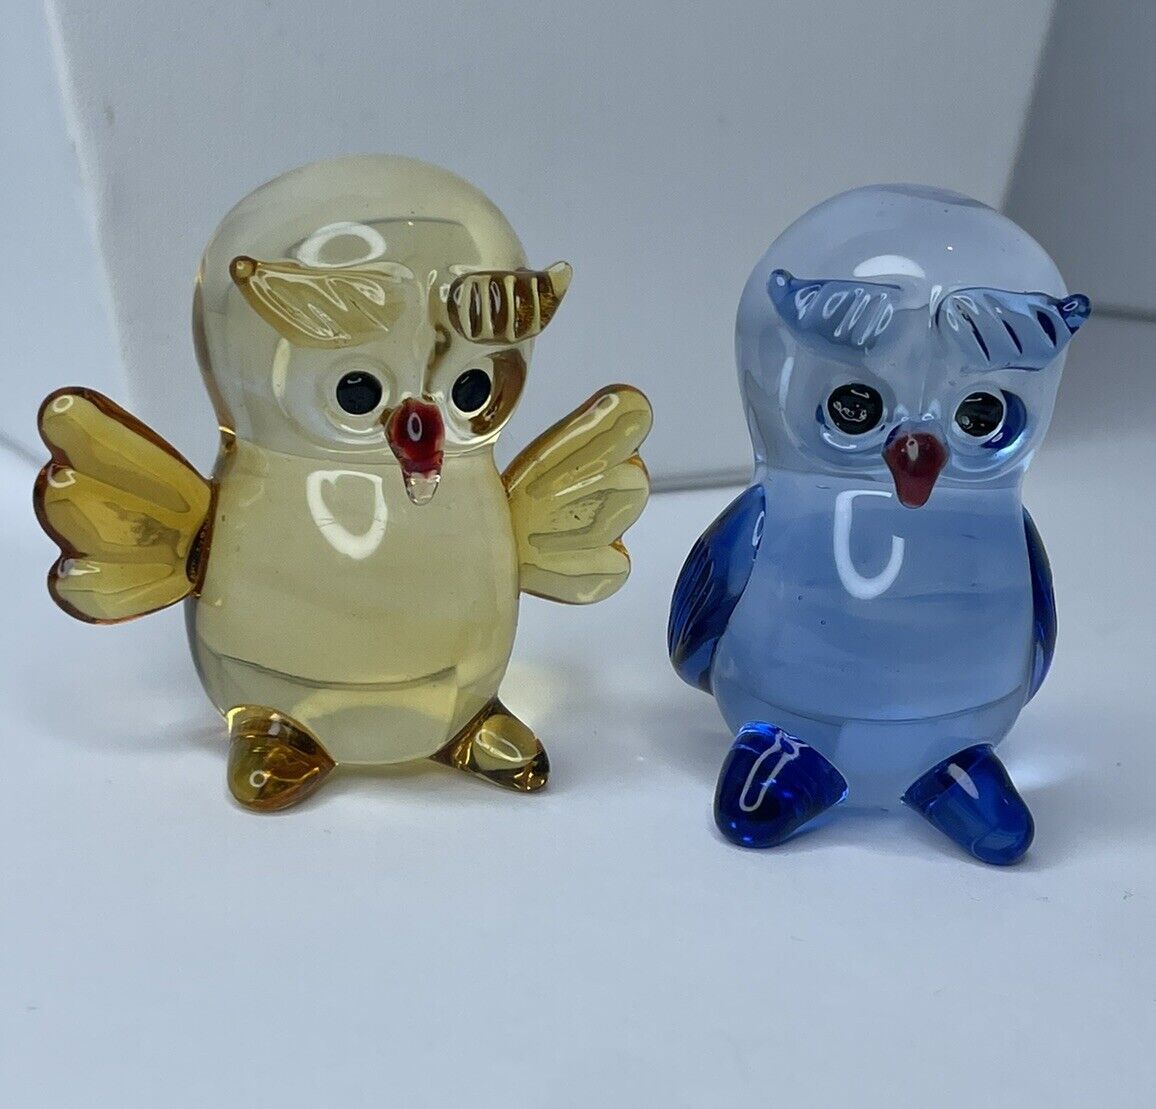 2 Lamp Work Owls By Lenox Hooting Twosome Owl Pair Figurines Blue Amber Glass